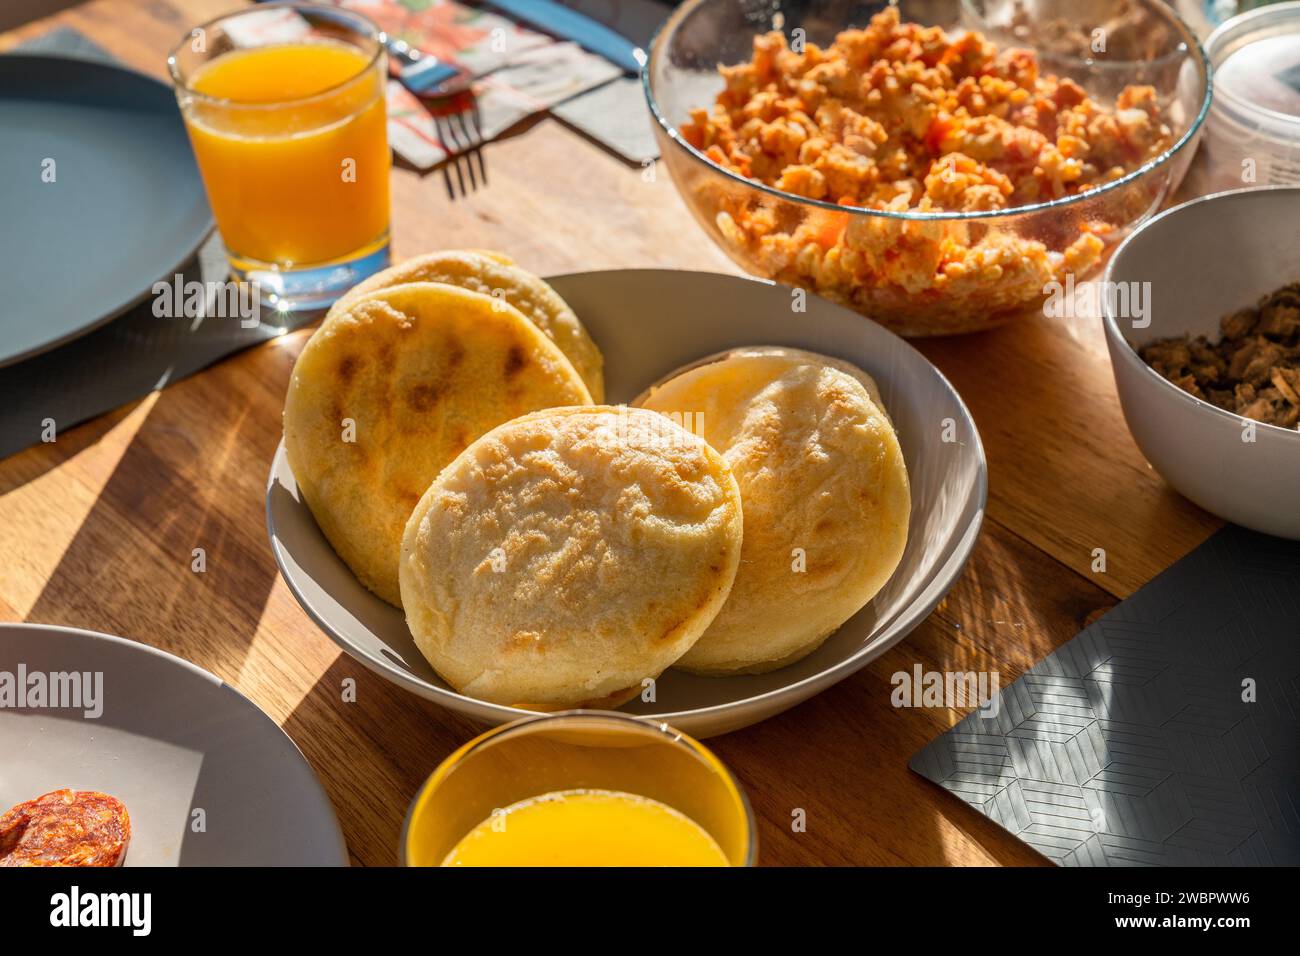 Arepas in the center of the breakfast table next to scrambled eggs, meat and orange juice in direct sunlight. Stock Photo